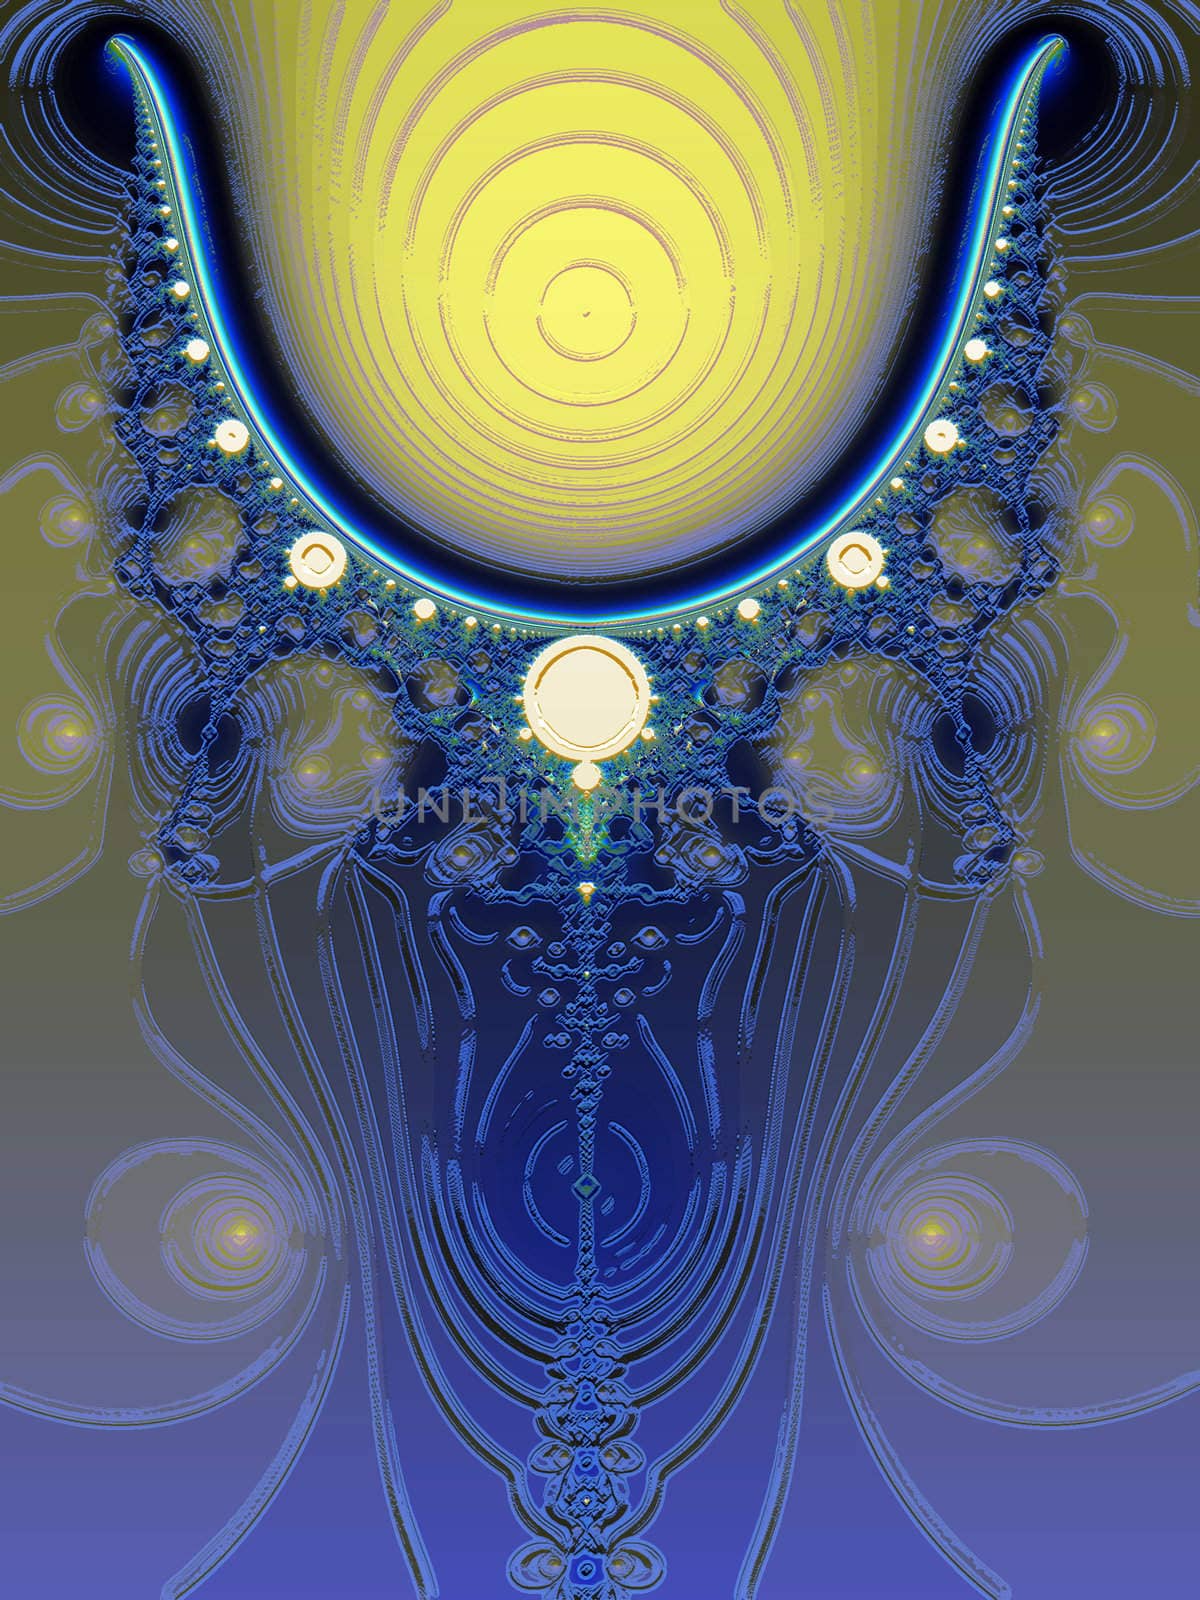 Glowing Blue and Yellow Fractal Design with Lighting Effects